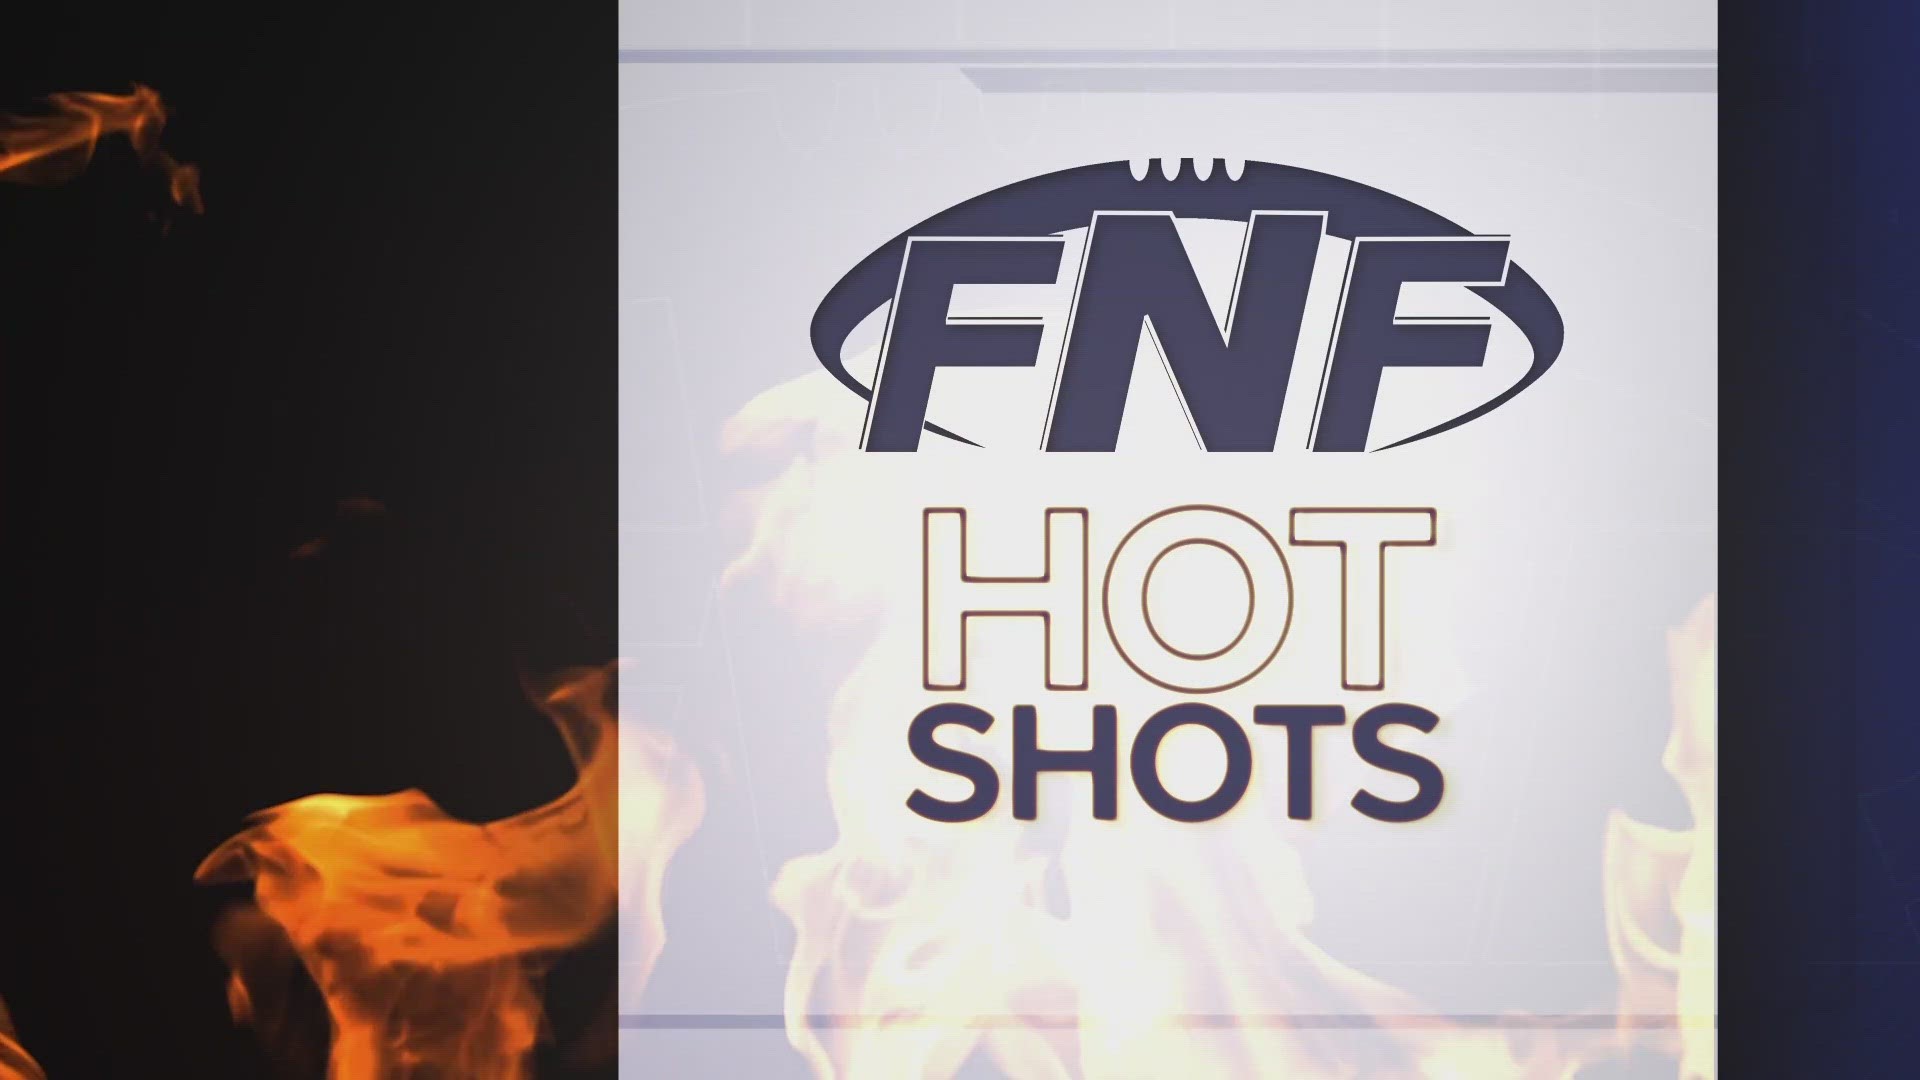 The FNF Hot Shots Play of the Week from the state championships comes from Centennial's Kenny Worthy, who had a diving TD catch in the Open Division state title game